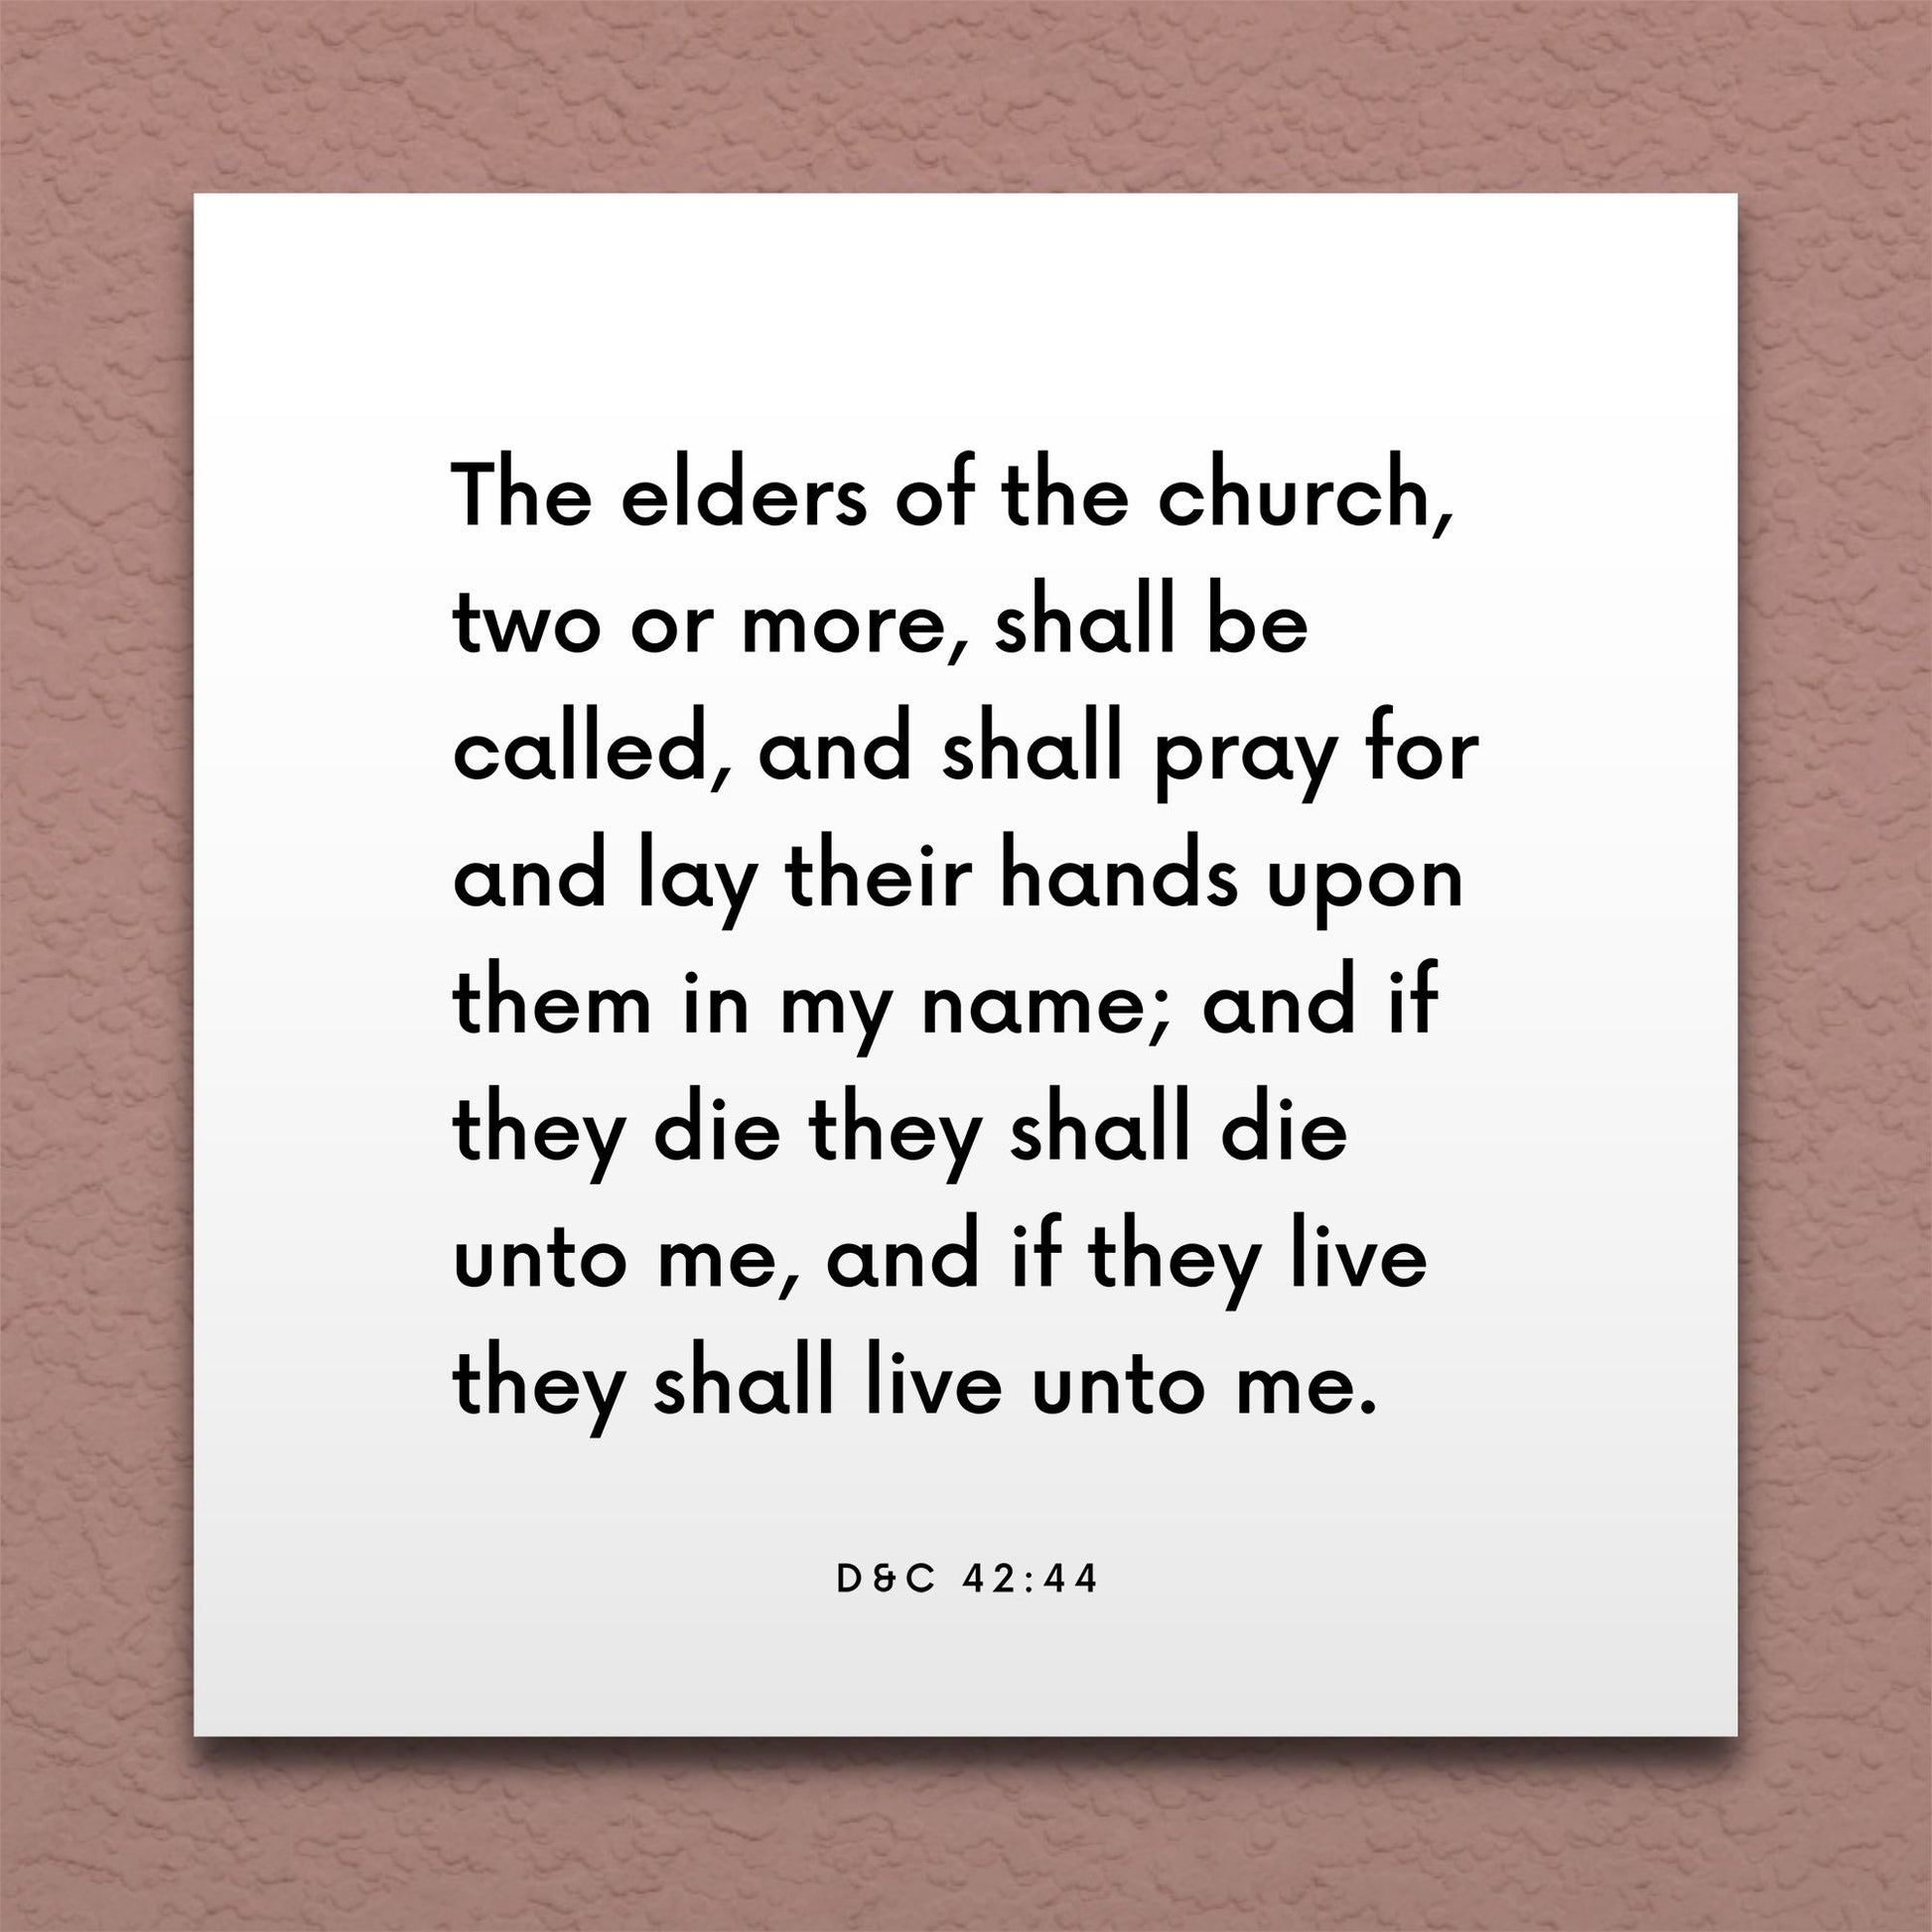 Wall-mounted scripture tile for D&C 42:44 - "The elders of the church shall lay their hands upon them"